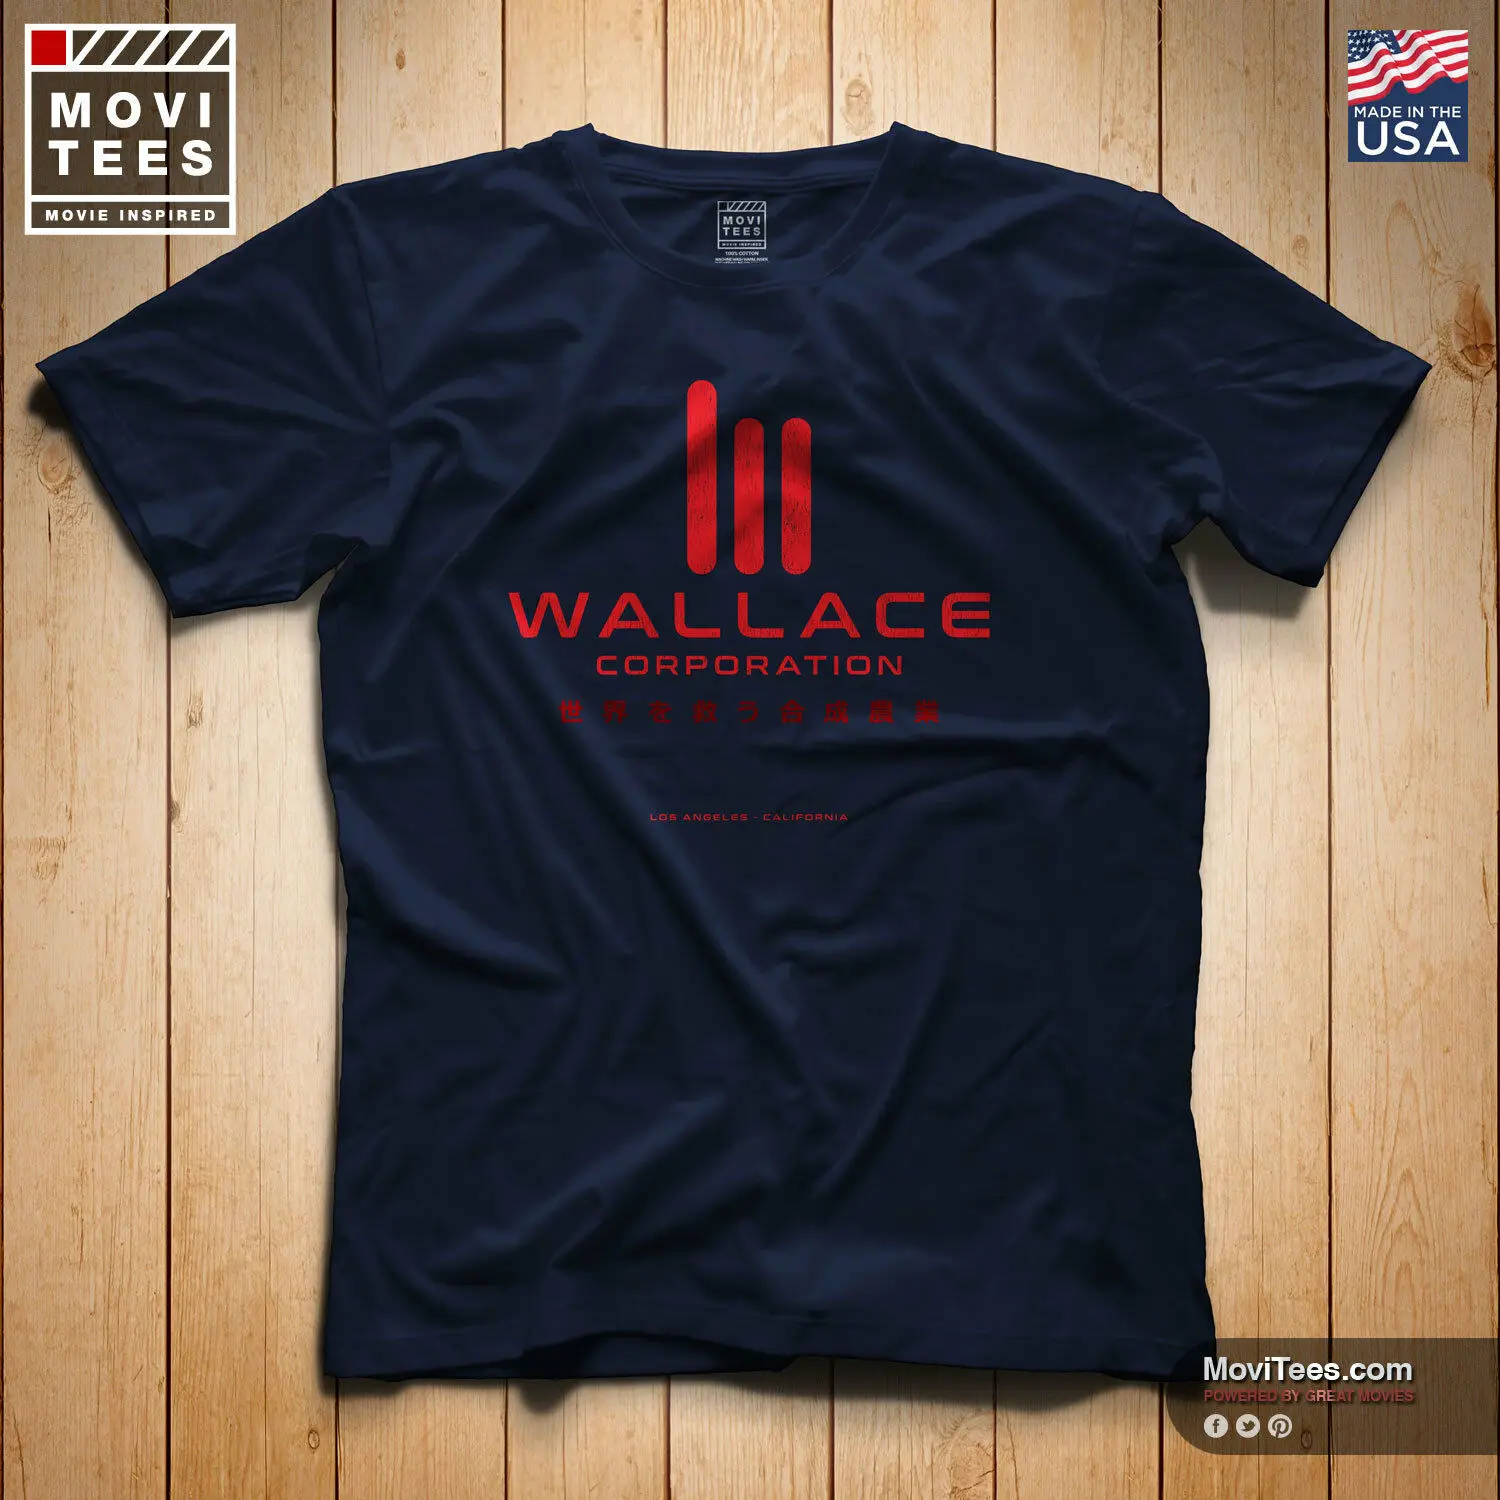 

Wallace Corporation T-Shirt Inspired By The 2017 Movie Blade Runner 2049 2019 Unisex Tee